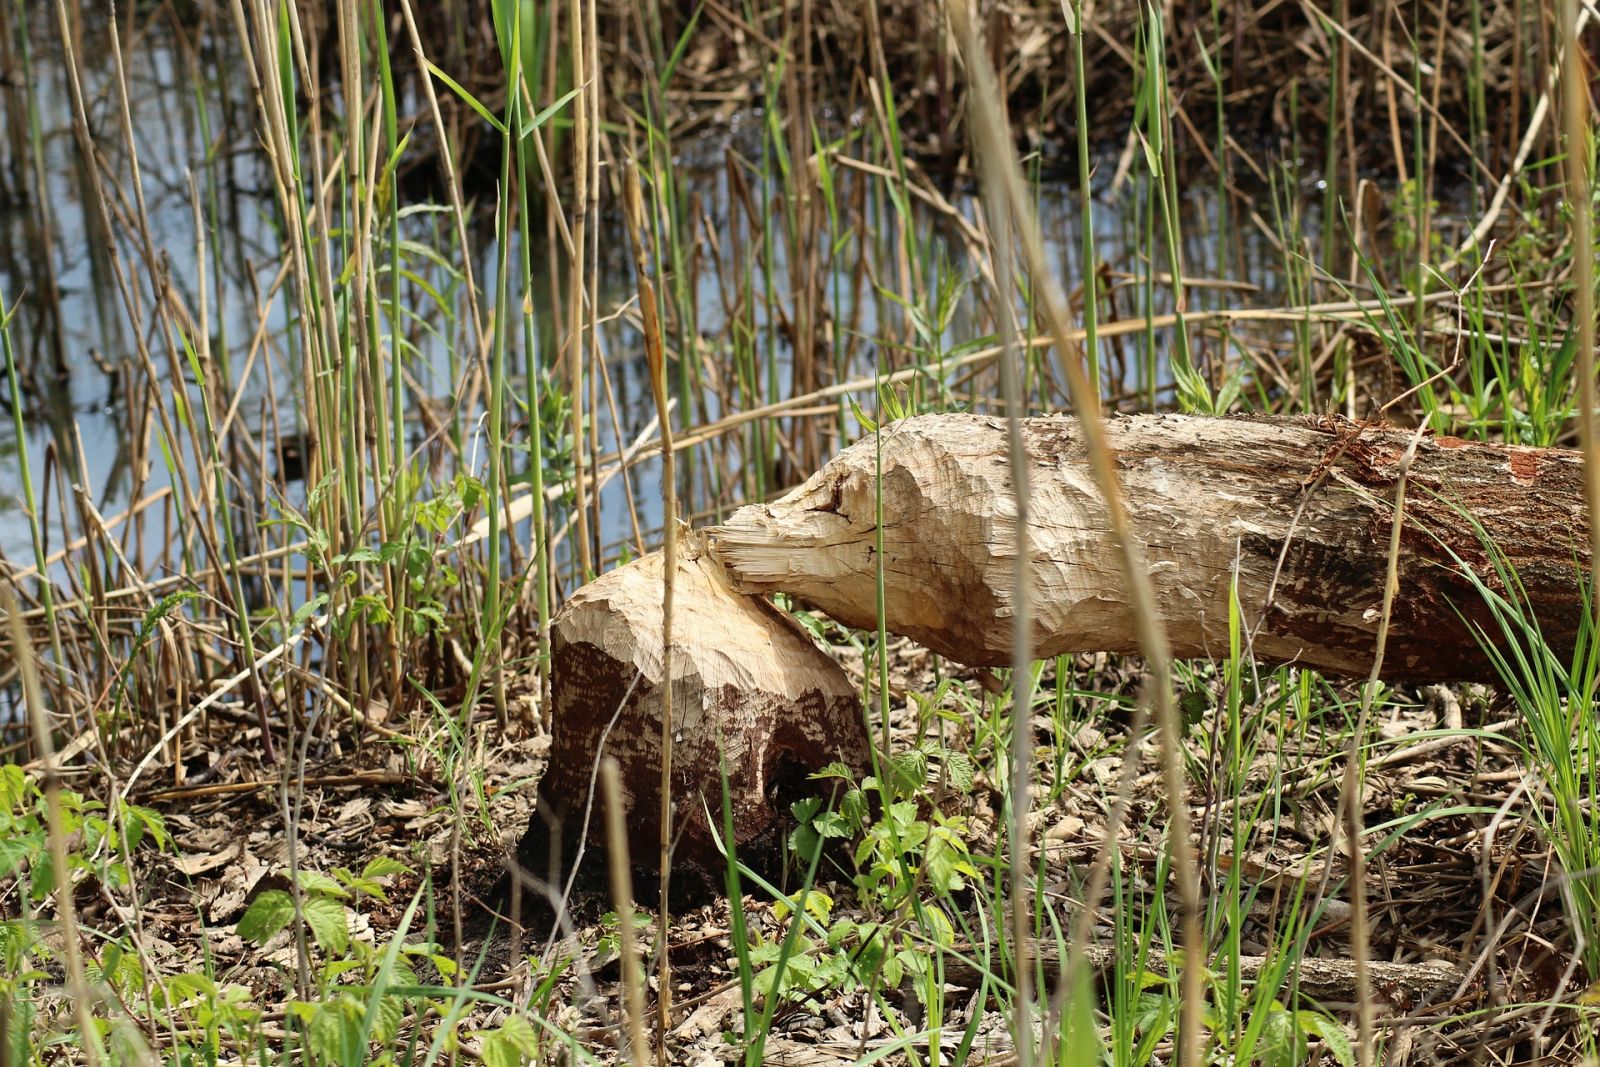 Could beavers deliver changes to the environment and inspire conservationists?